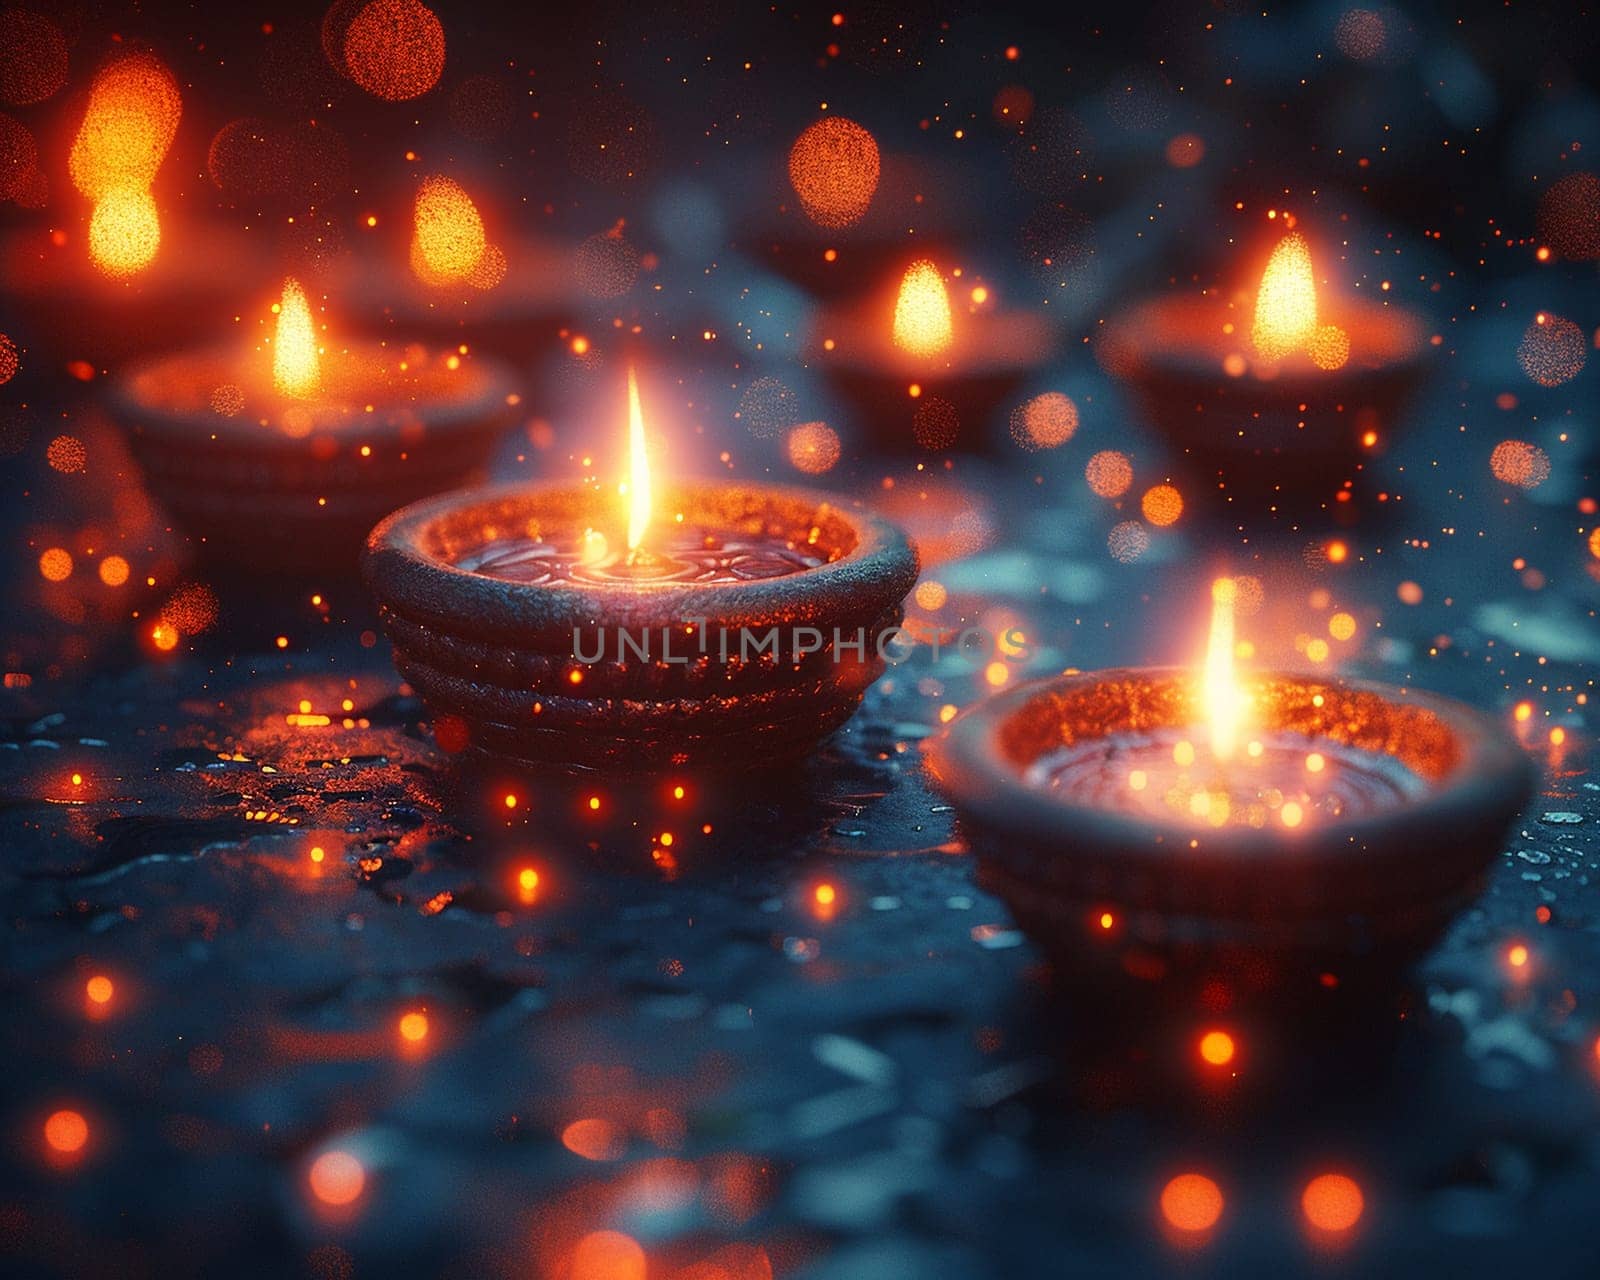 Hindu Diya Lamps Casting Soft Glows for Diwali The lights blur together by Benzoix